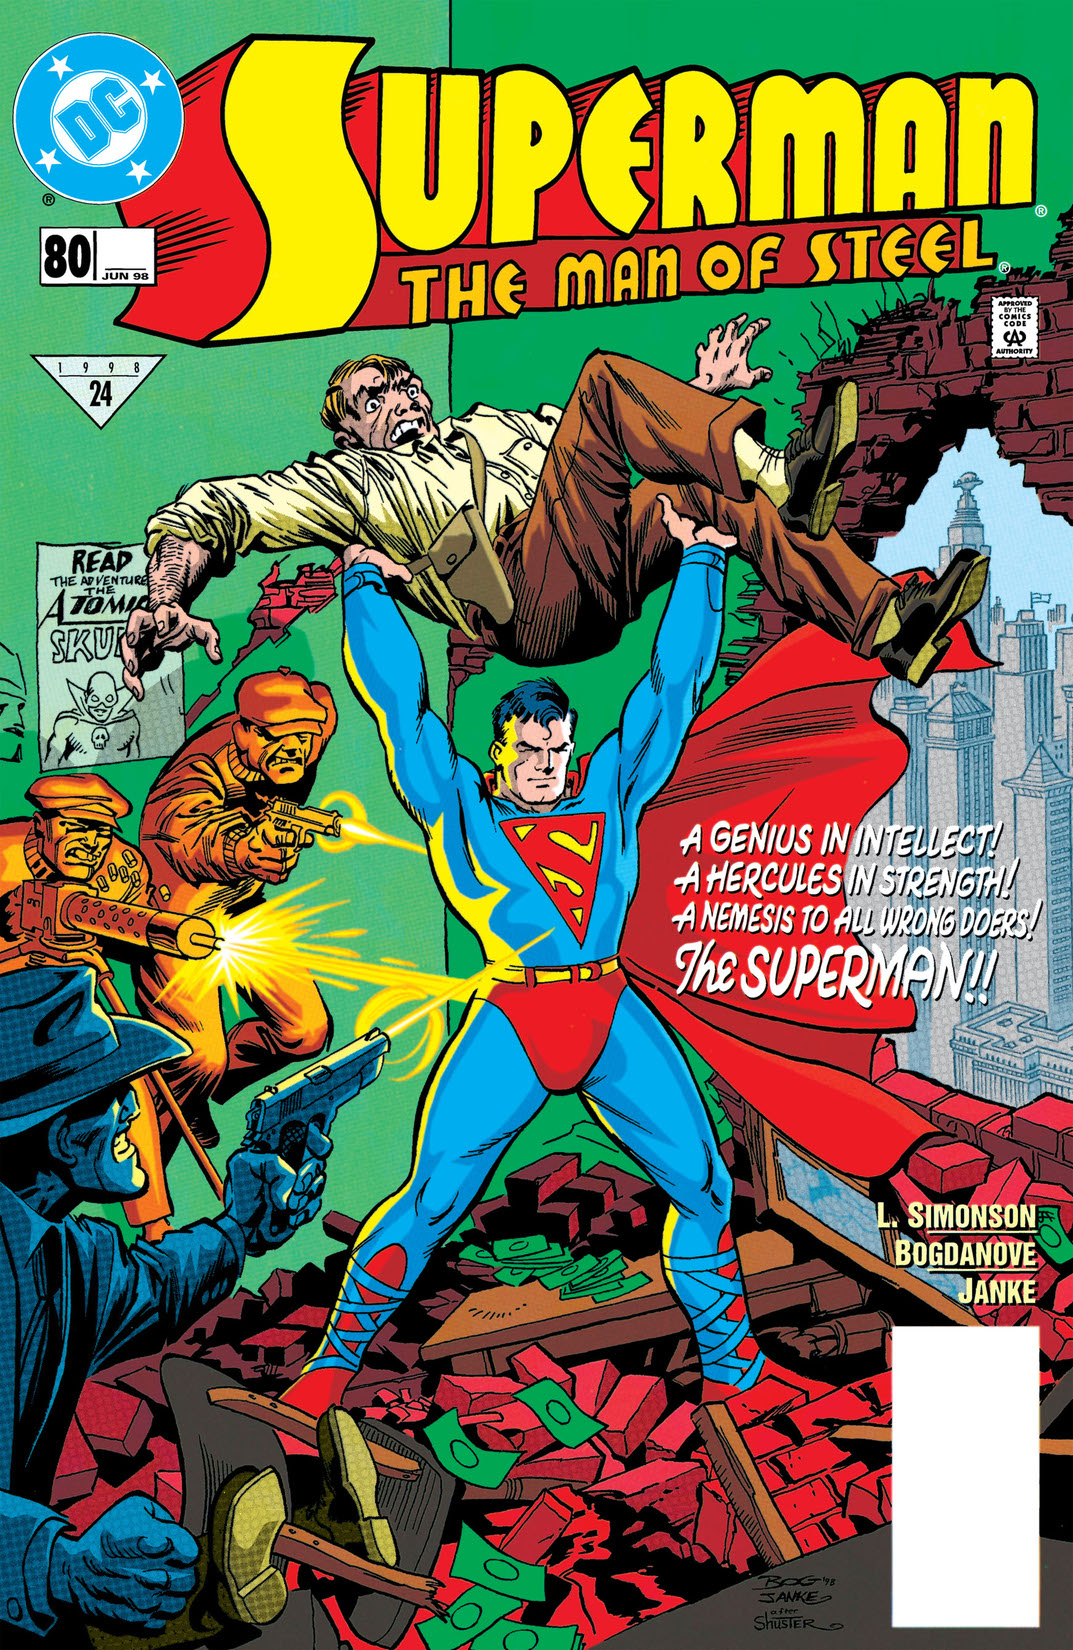 Superman: The Man of Steel #80 preview images